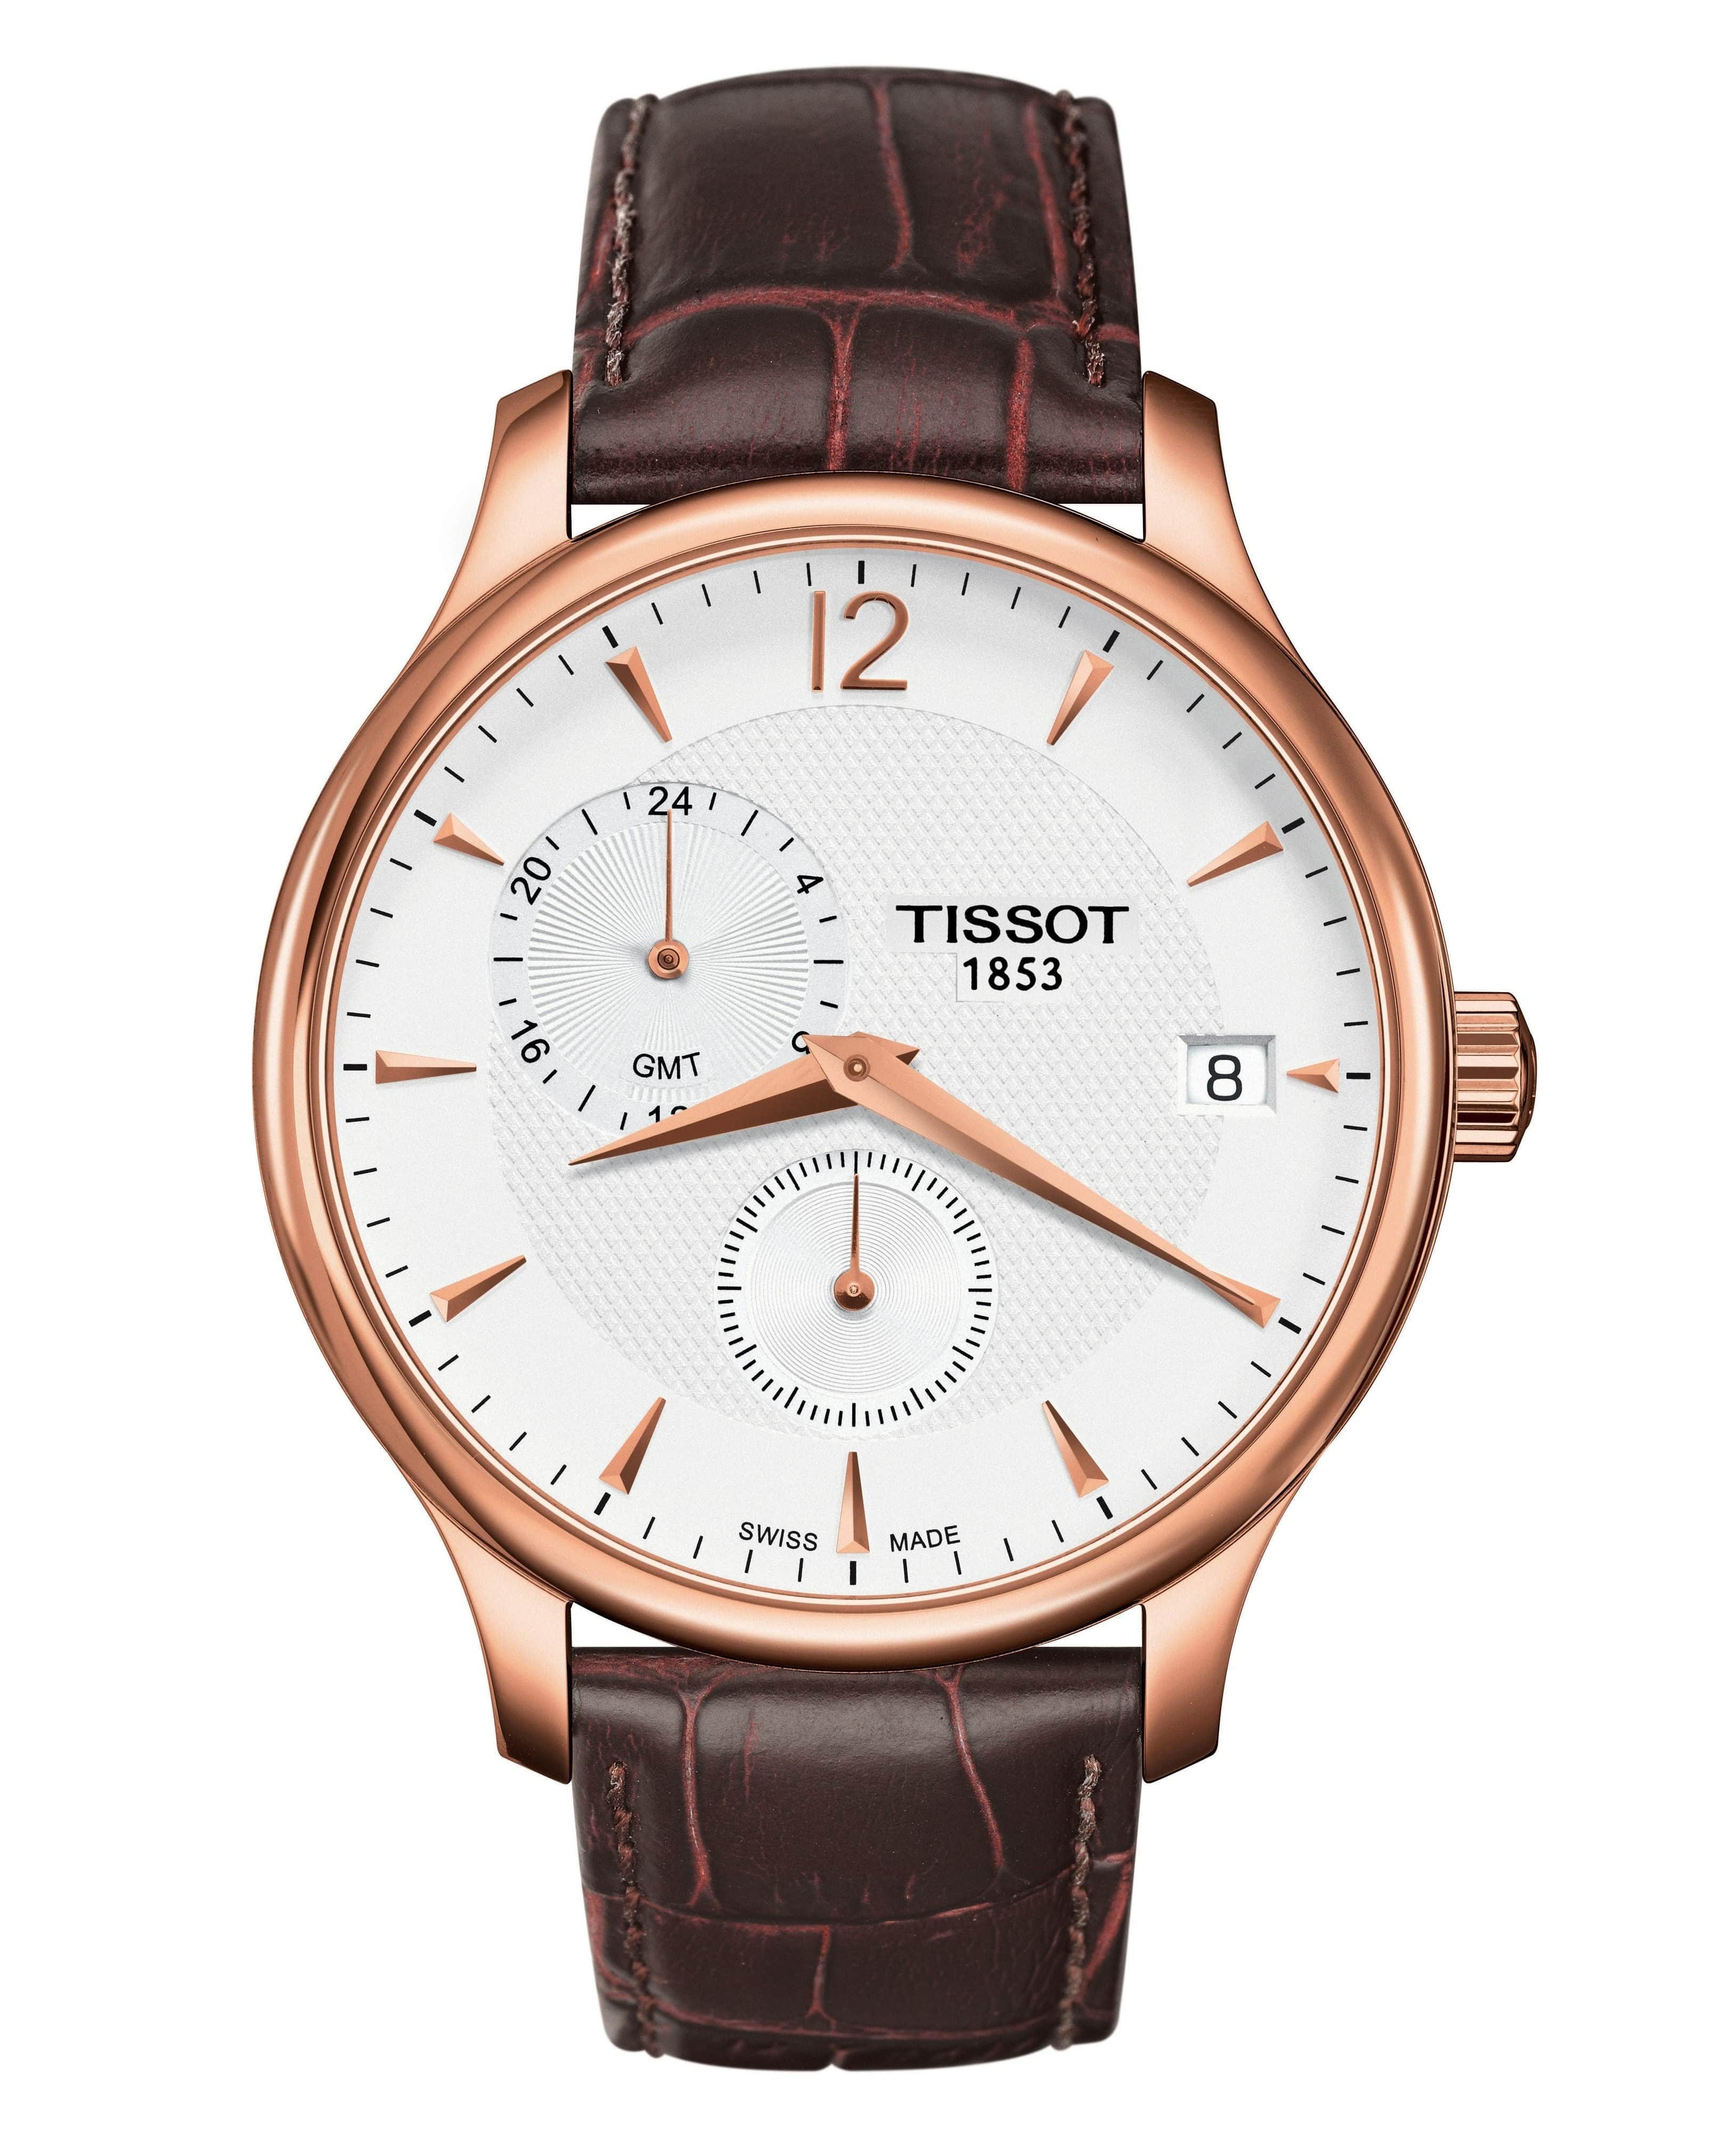 ĐỒNG HỒ DÂY DA NAM TISSOT TRADITION GMT ROSE GOLD LEATHER STRAP WATCH T063.639.36.037.00 10